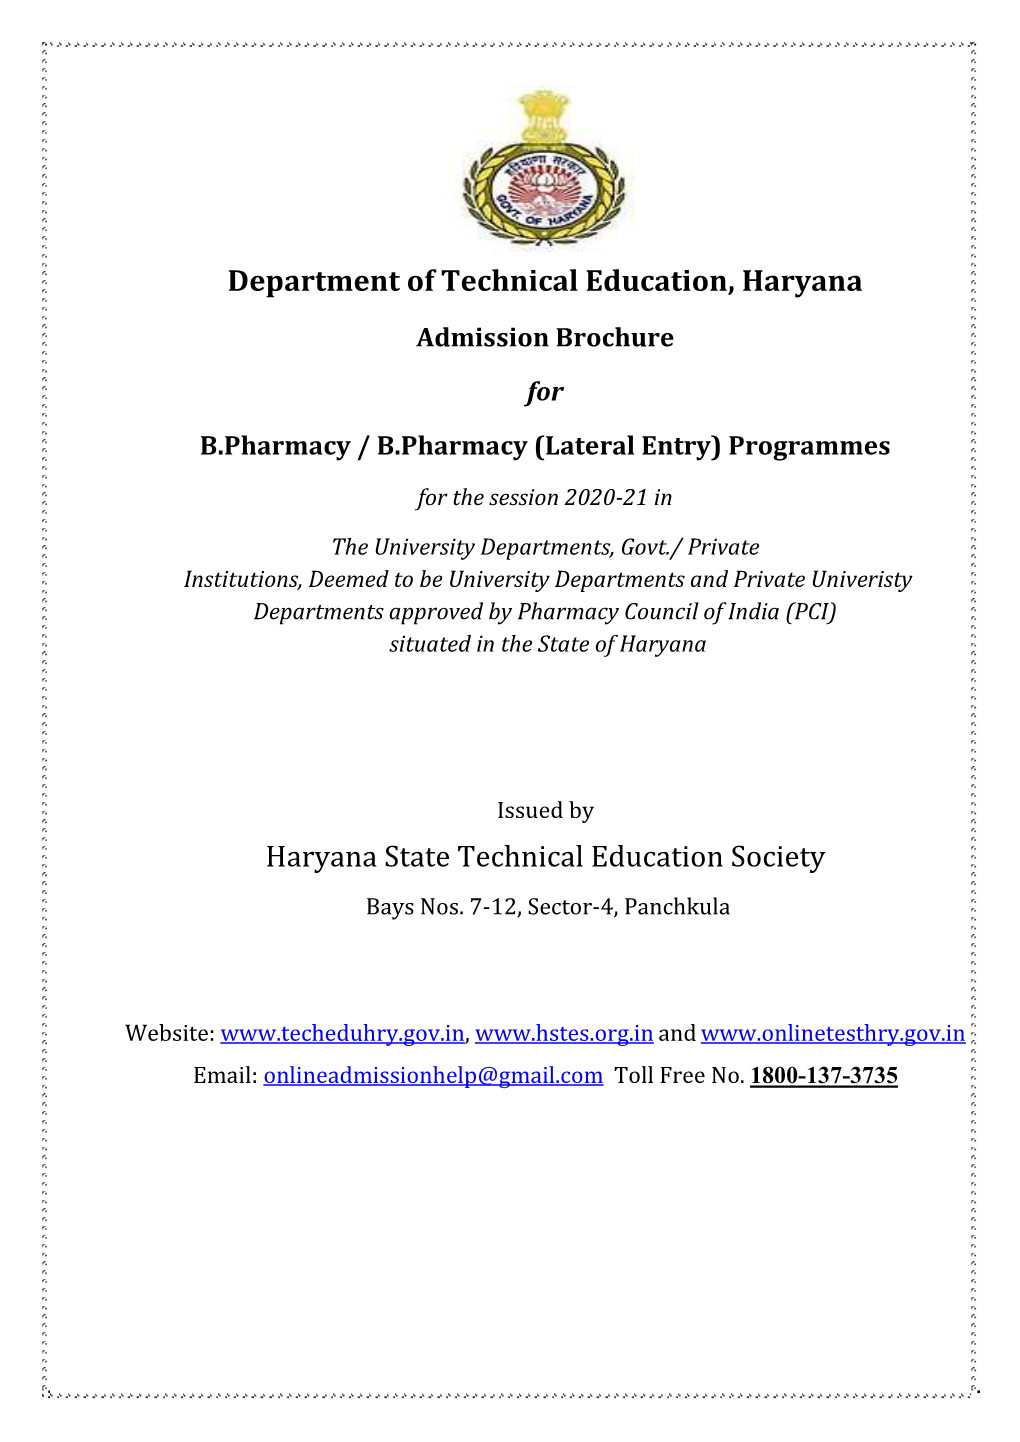 Lateral Entry) Programmes